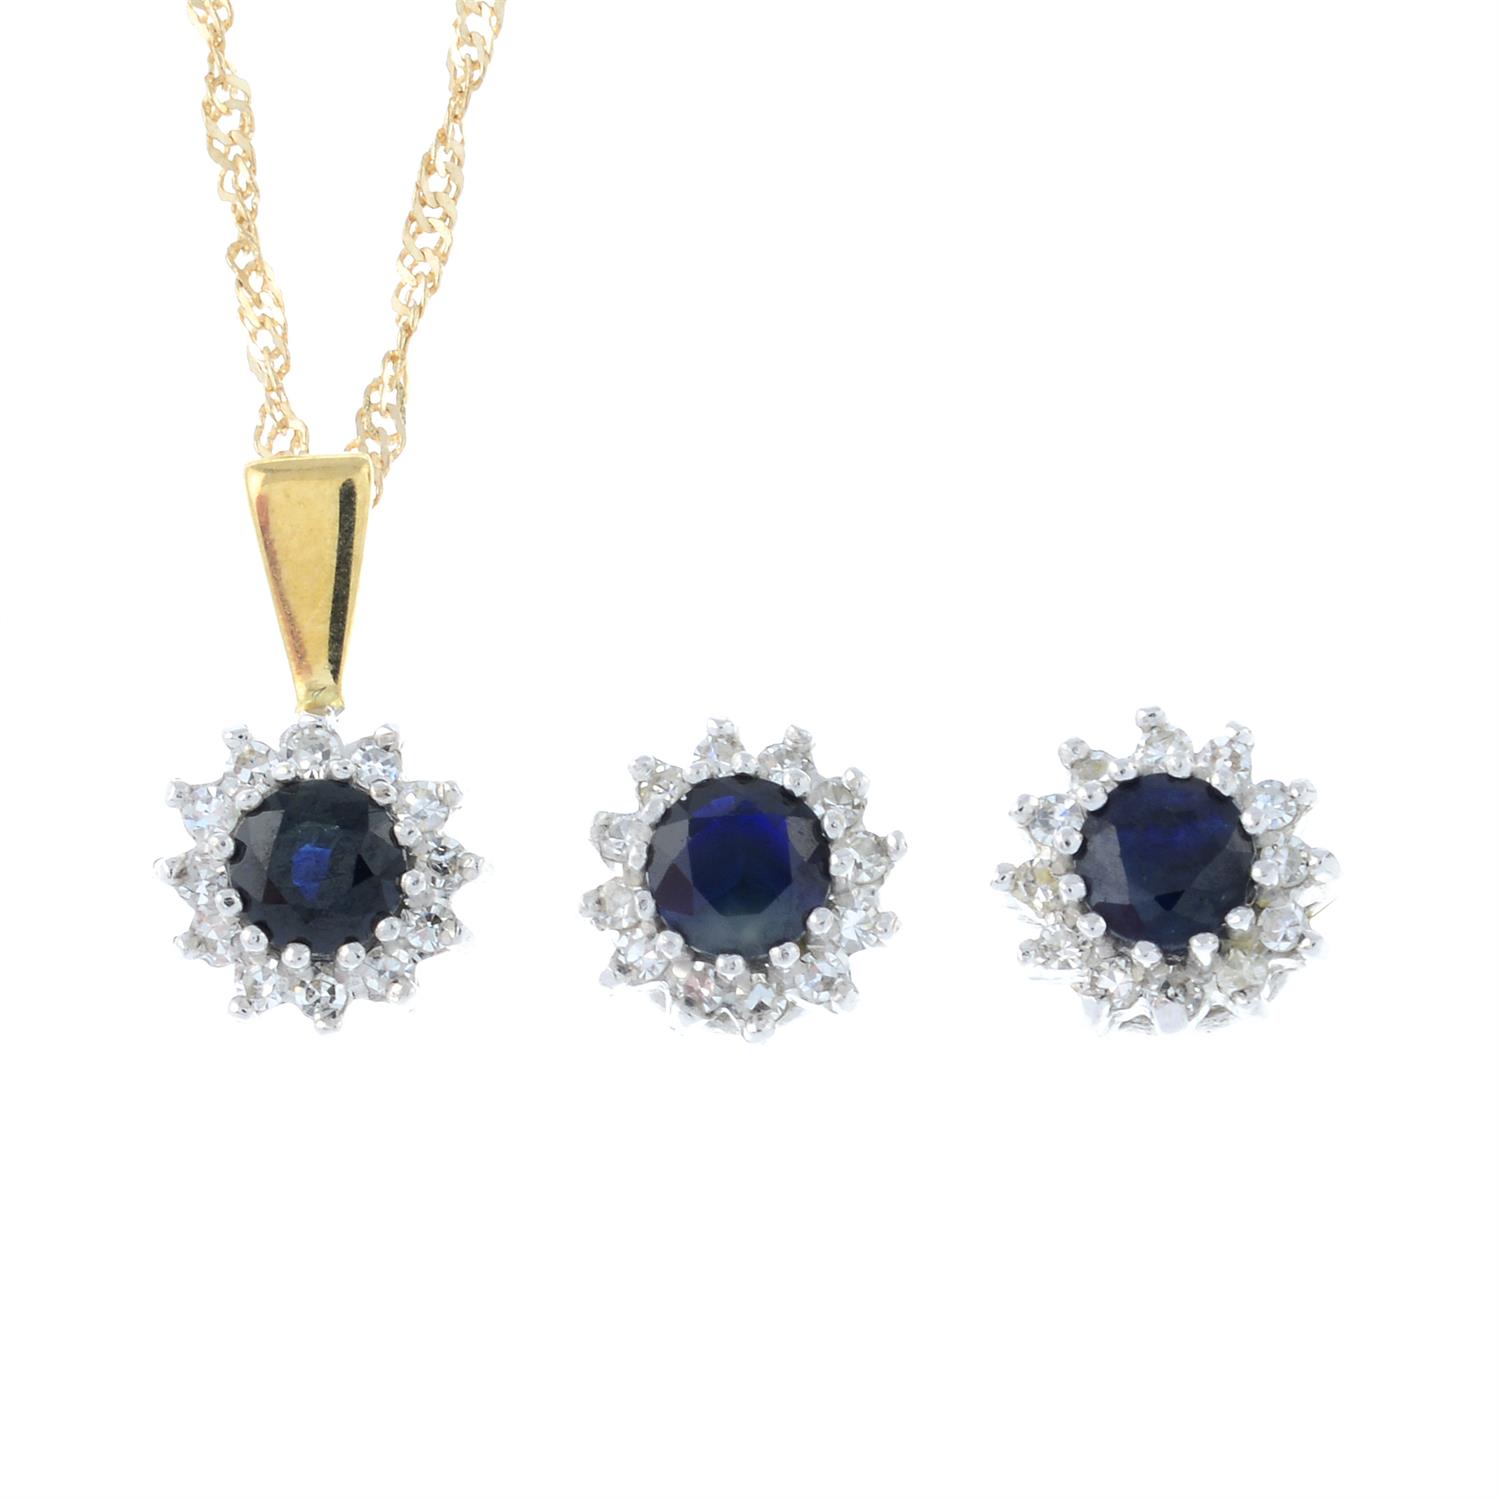 A 9ct gold sapphire and single-cut diamond cluster pendant and chain, with matching stud earrings.